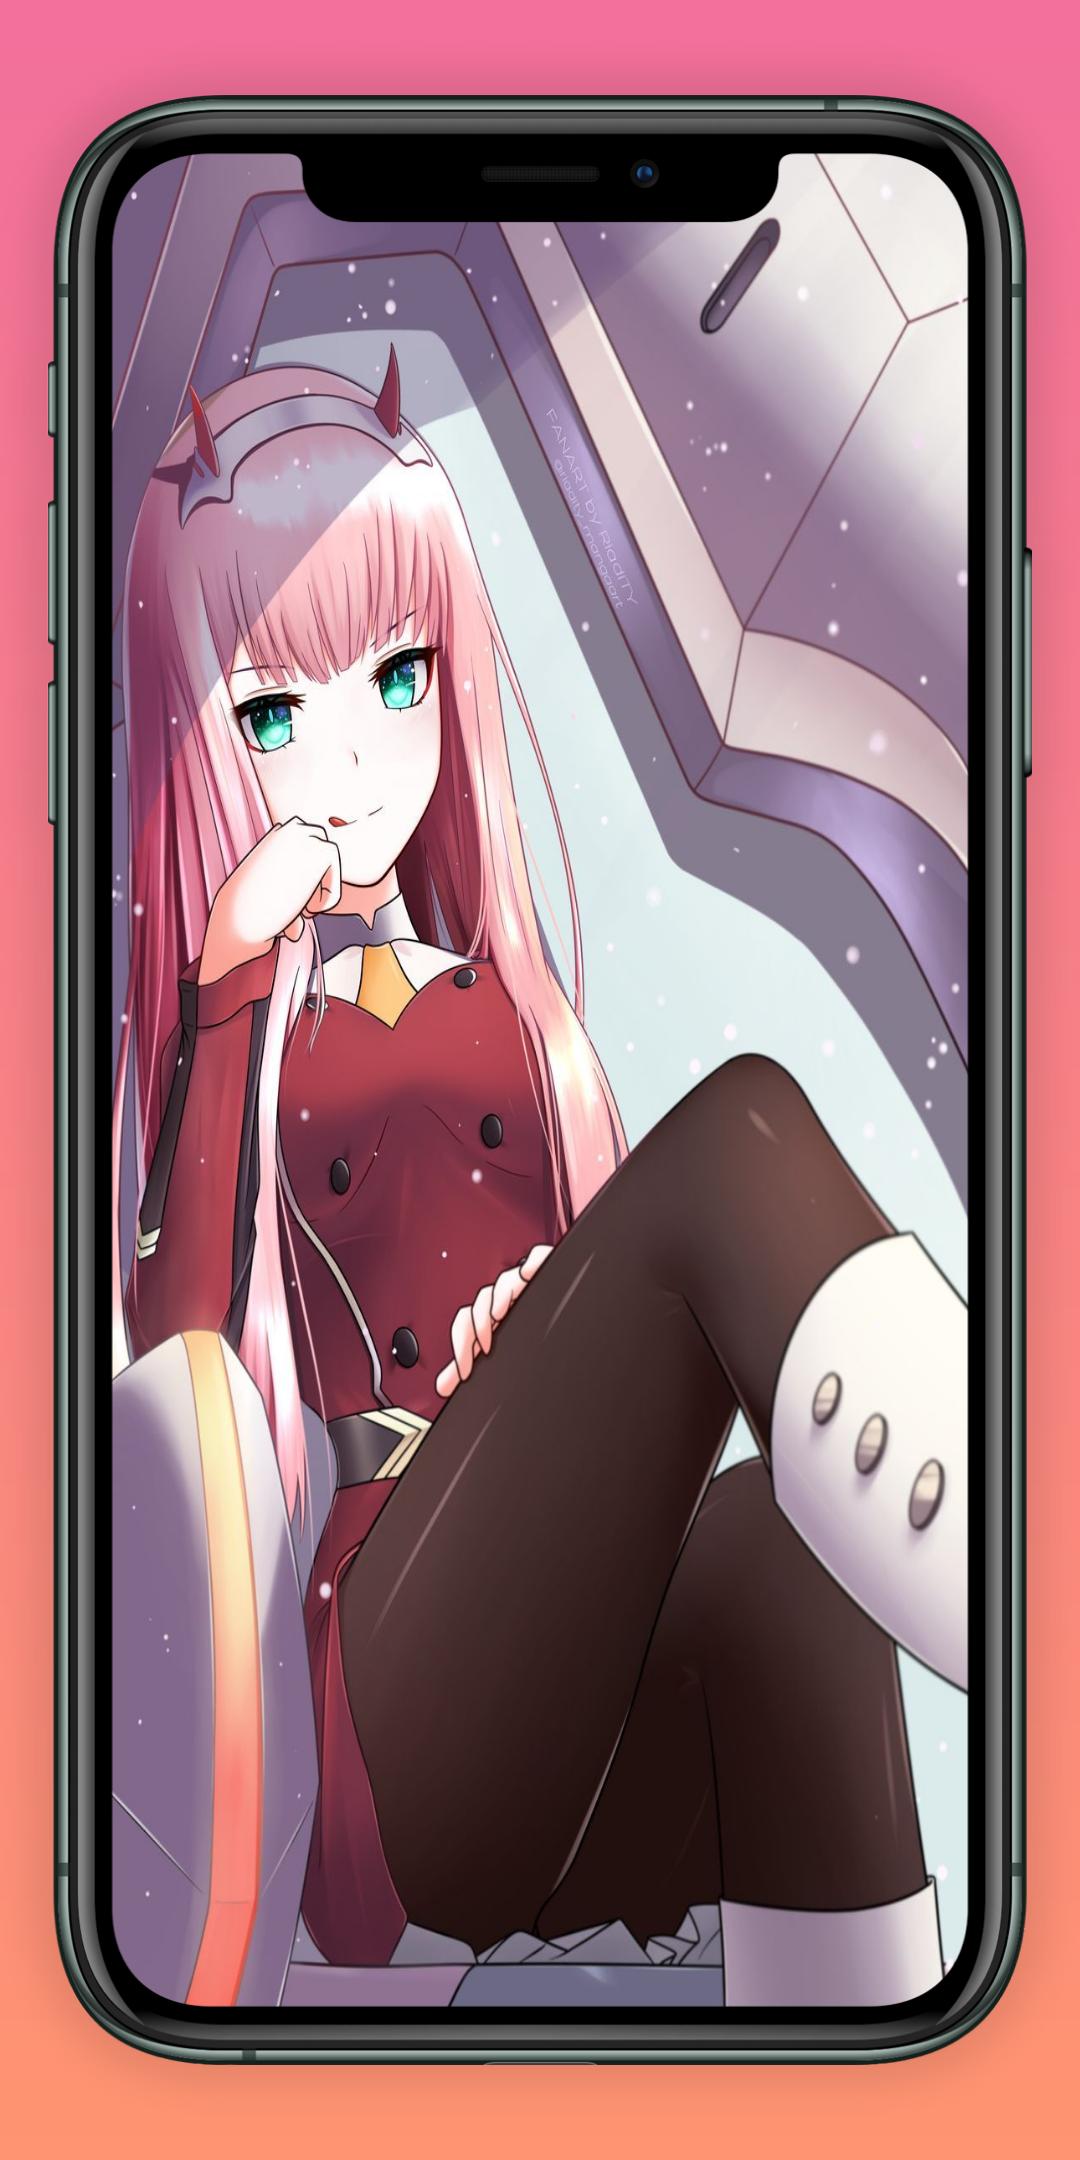 Zero Two Anime Wallpaper Hd 4k For Android Apk Download